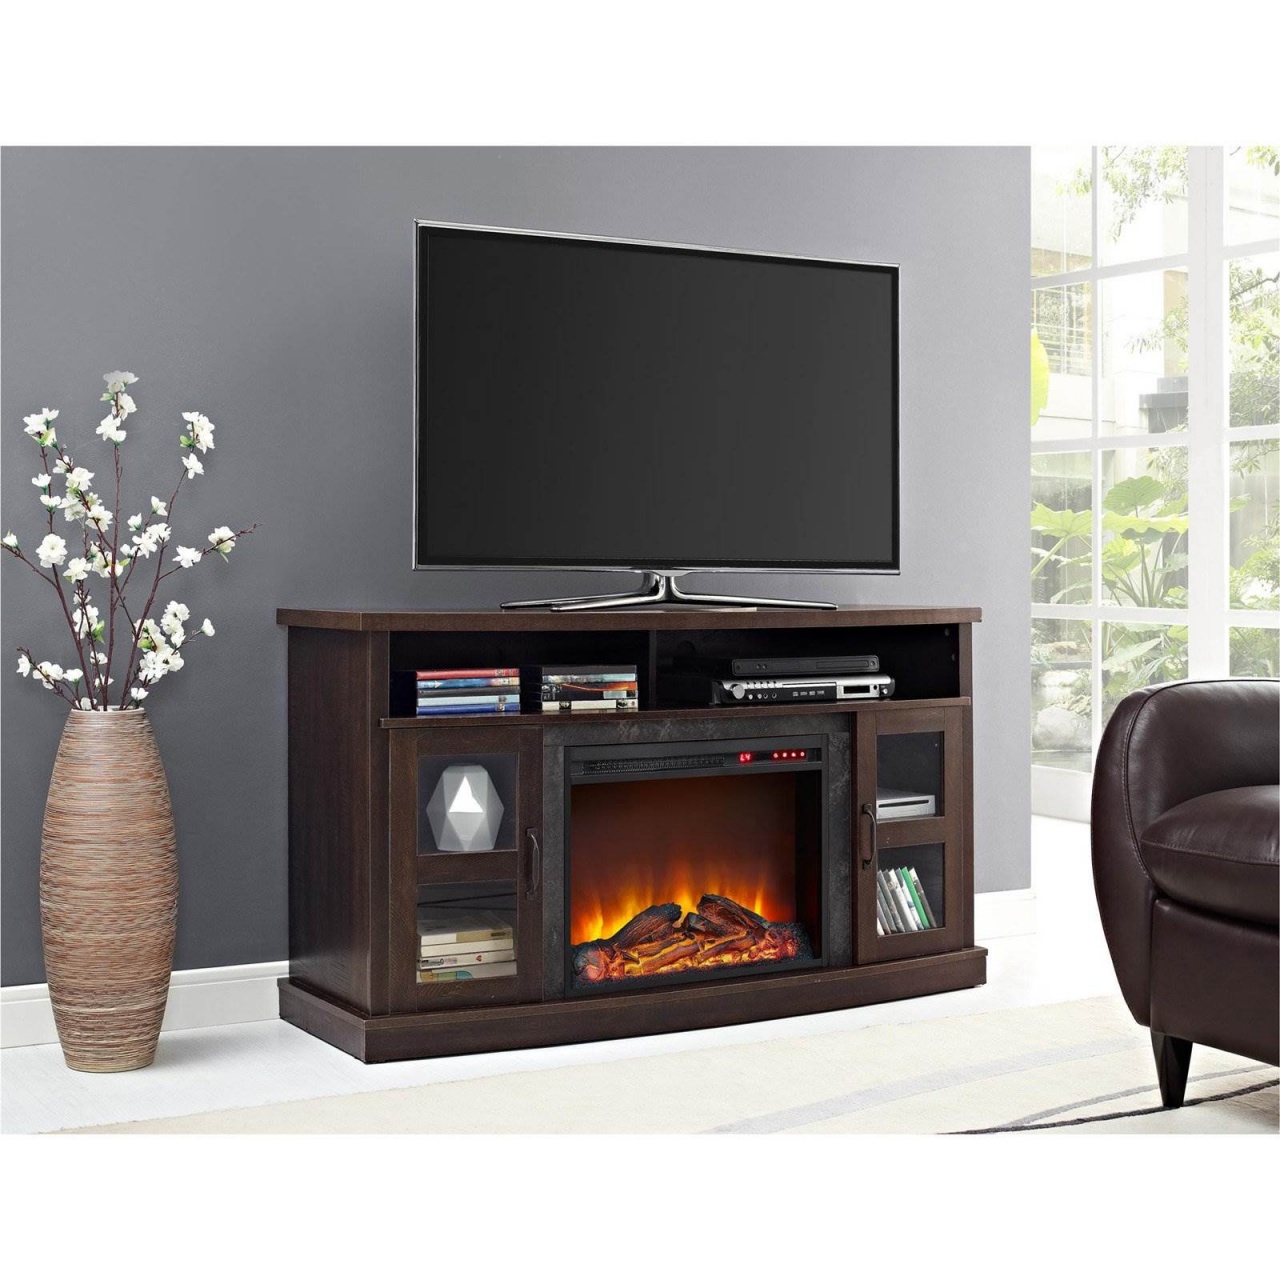 Big Lots Tv Stands Elegant Most Realistic Electric Fireplace Insert – Fireplace Ideas